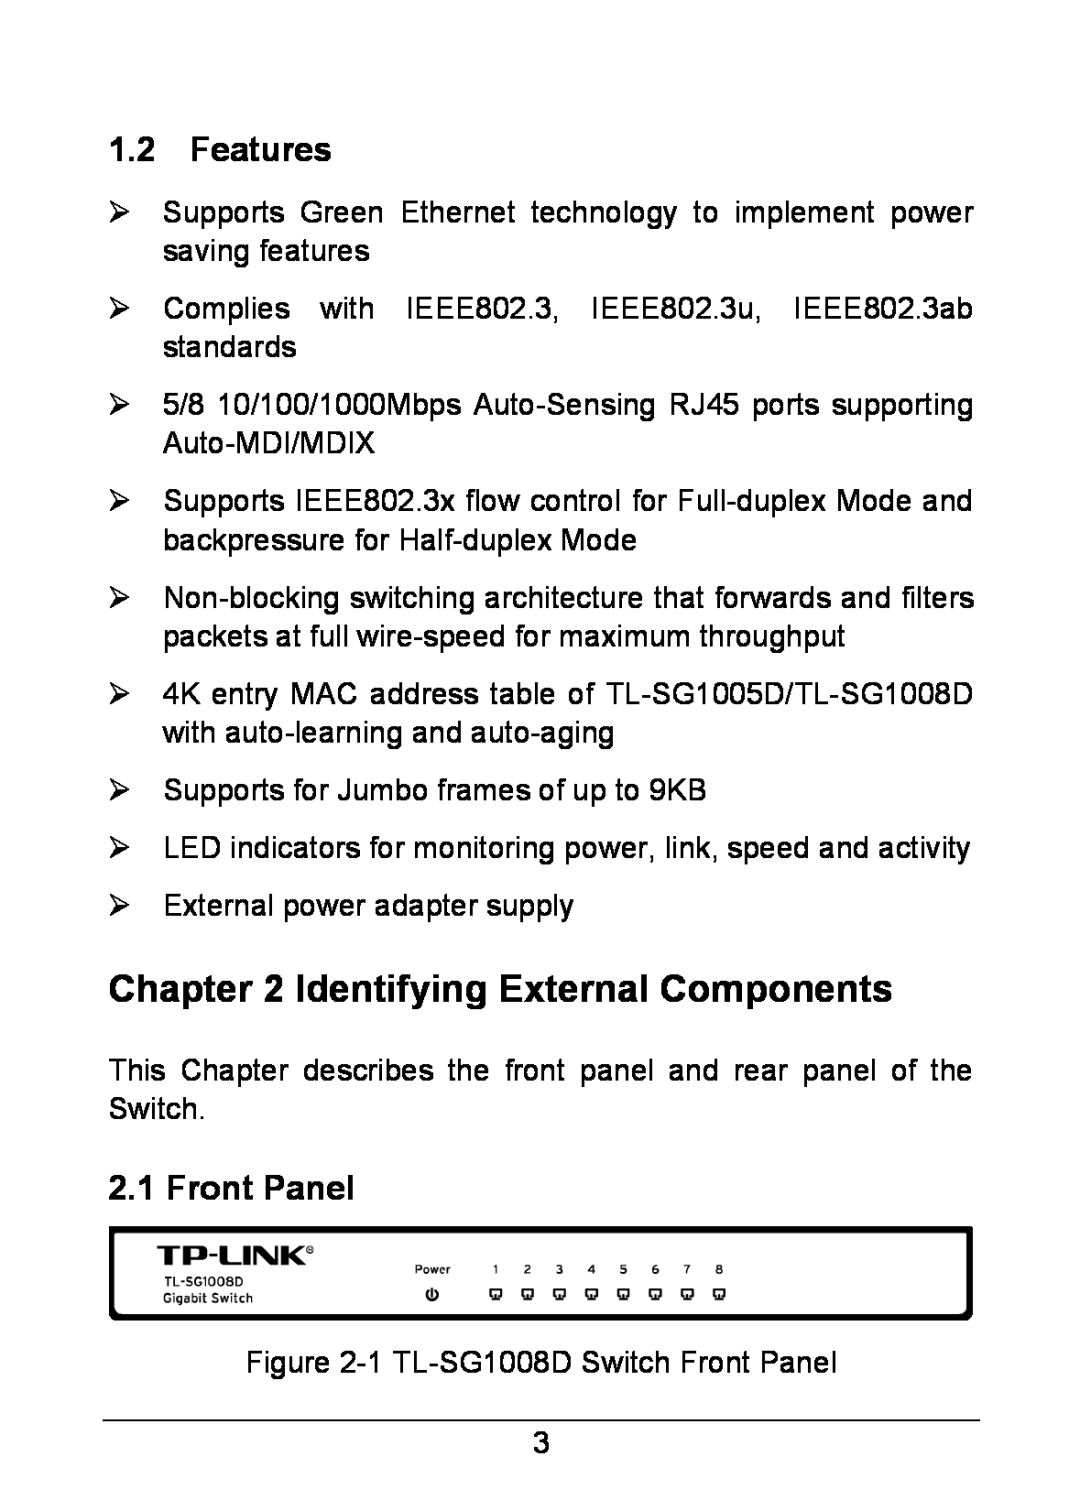 TP-Link TL-SG1008D, TL-SG1005D manual Identifying External Components, Features, Front Panel 